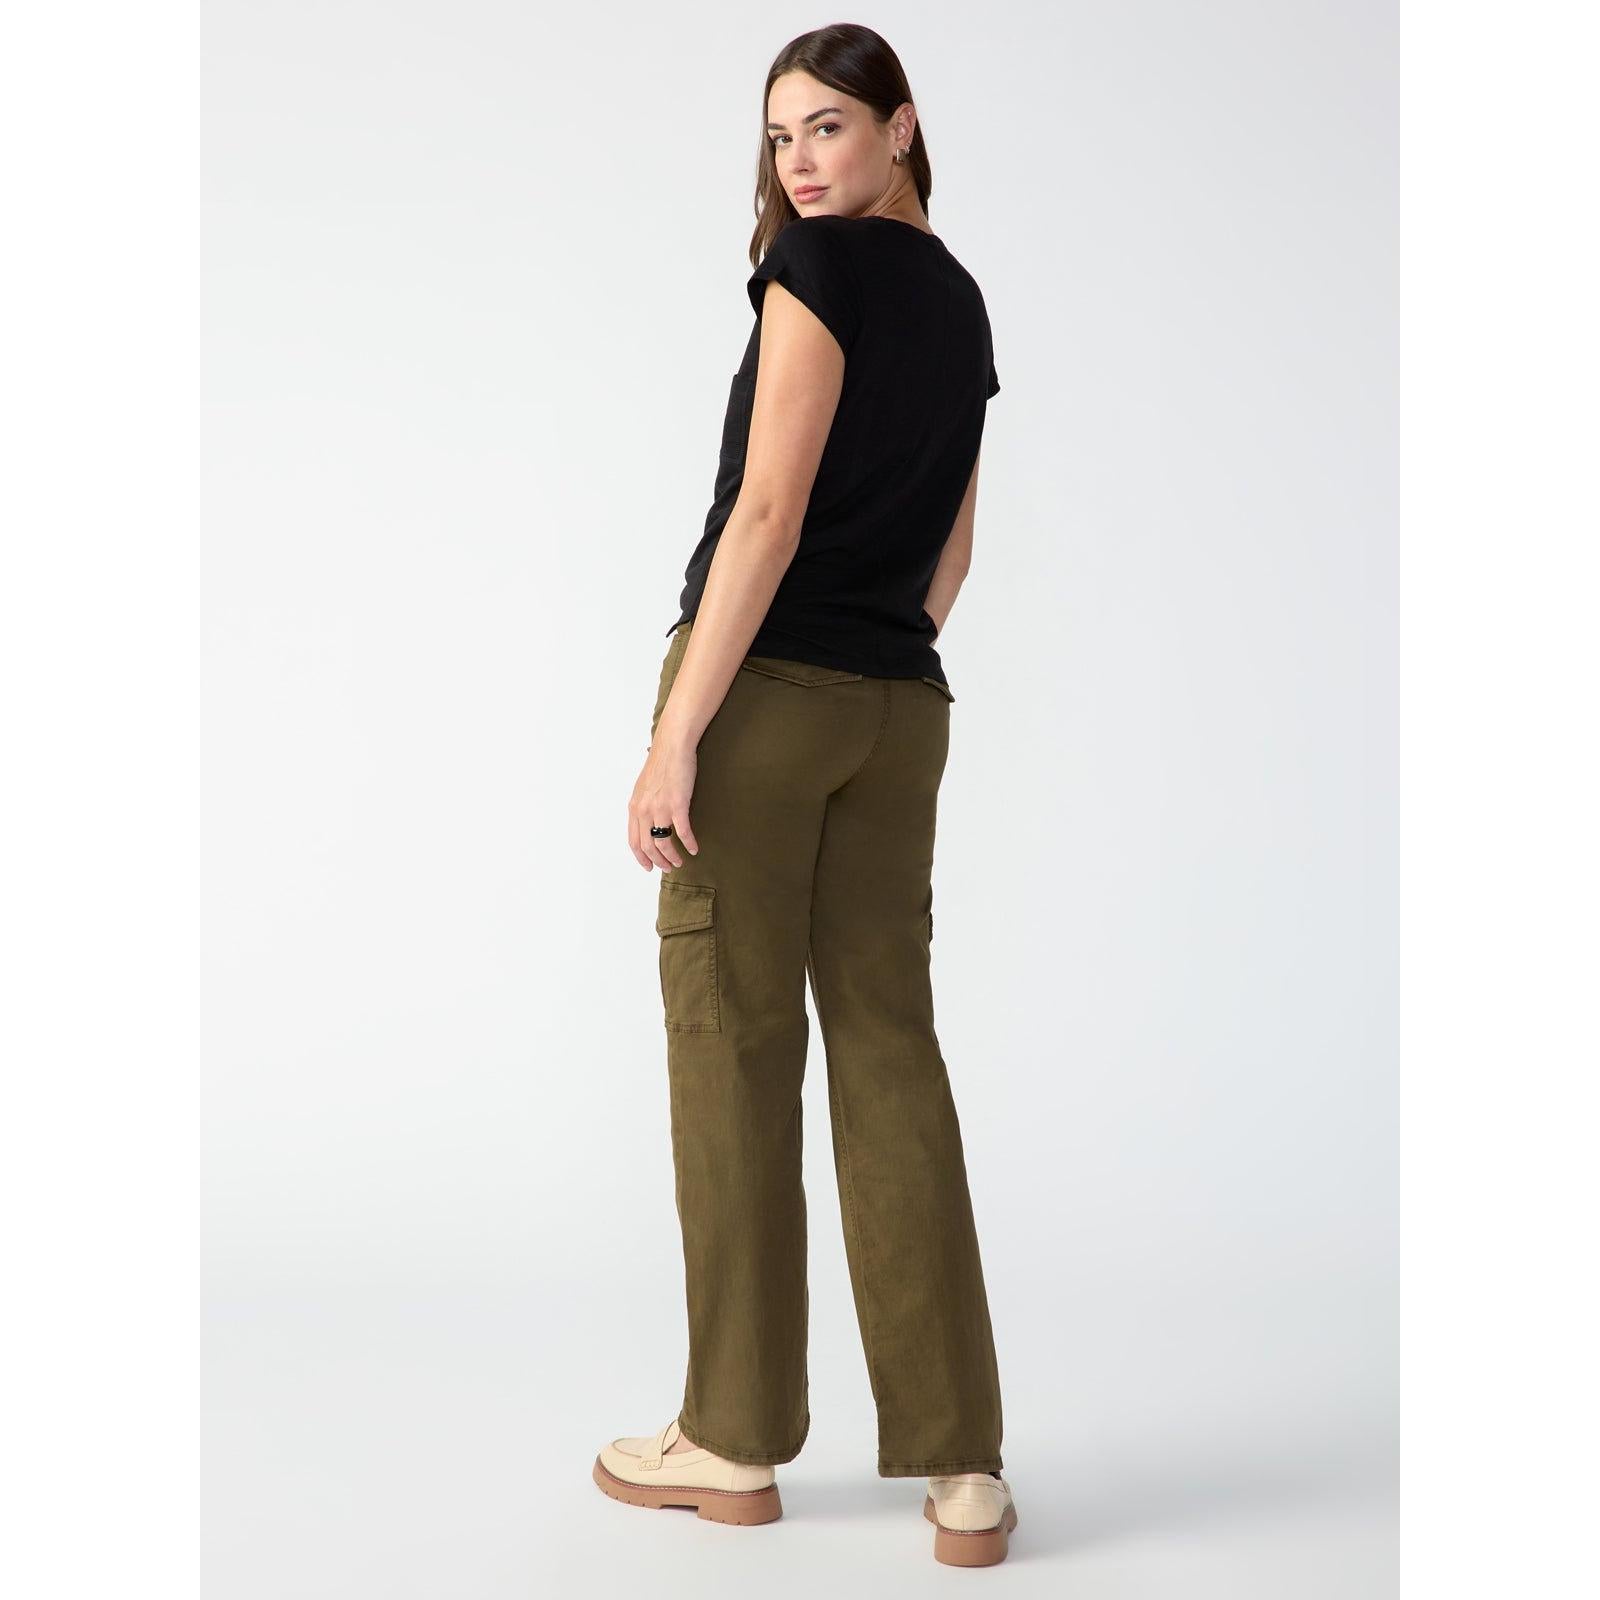 Sanctuary - Flashback Cargo High Rise Pant in  Canteen-SQ4049416